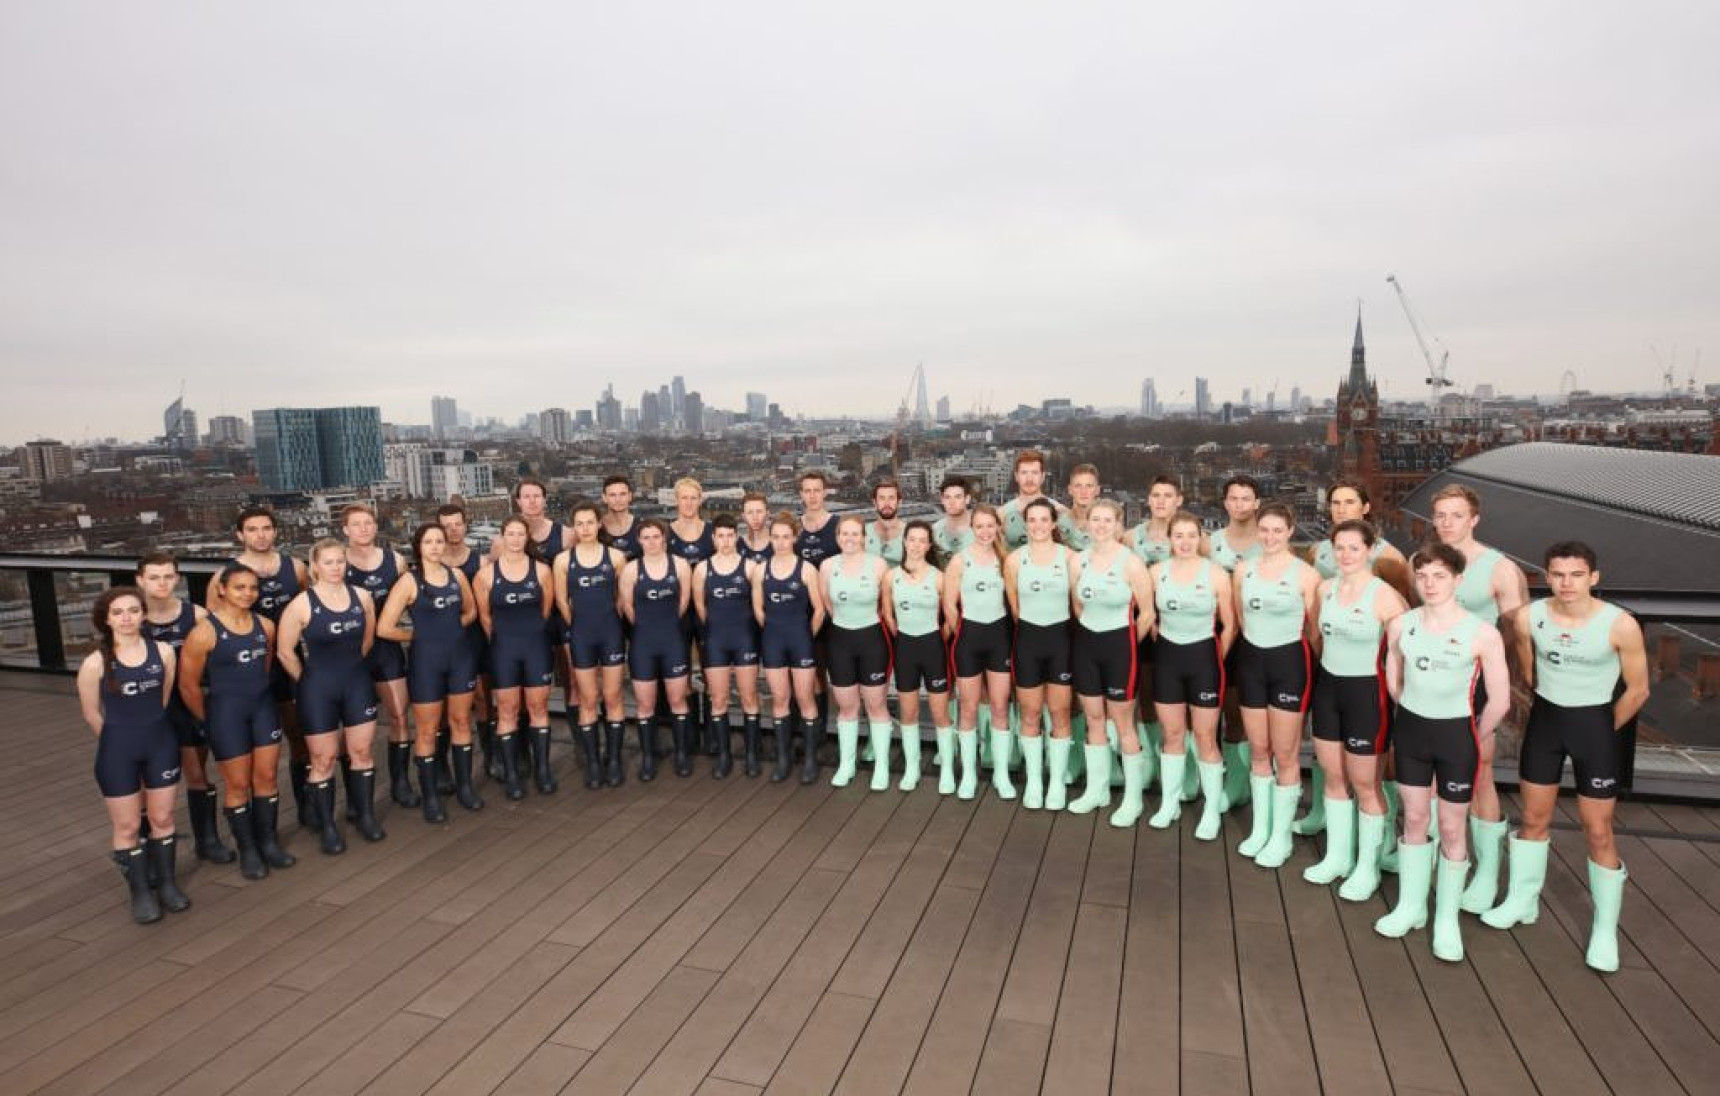 The 2017 Cancer Research UK Boat Race crews. Oxford (left) vs Cambridge (right).